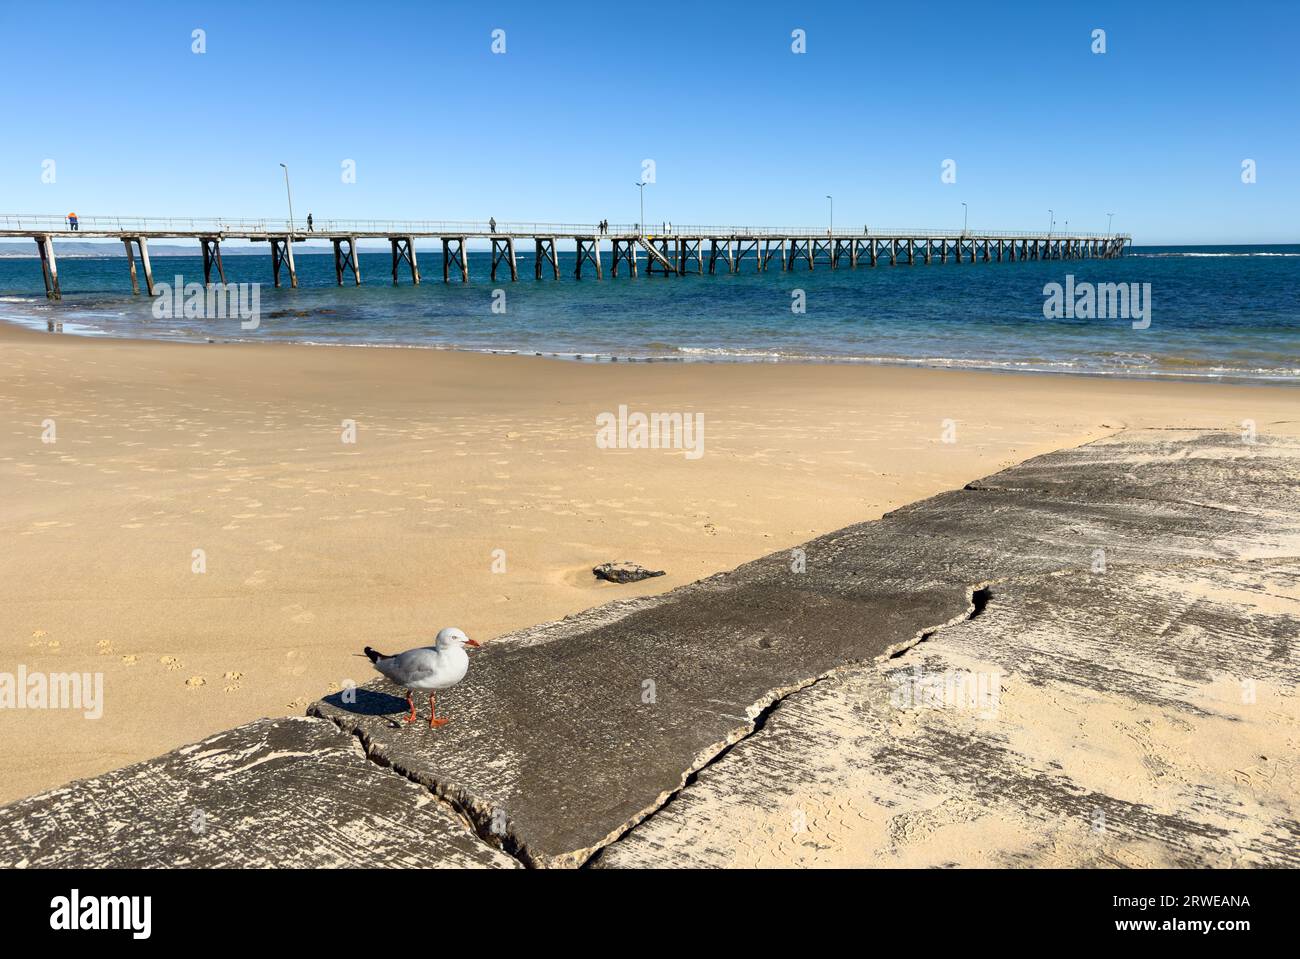 Classic wooden Port Noarlunga Jetty stretches out into the ocean in Adelaide, South Australia Stock Photo